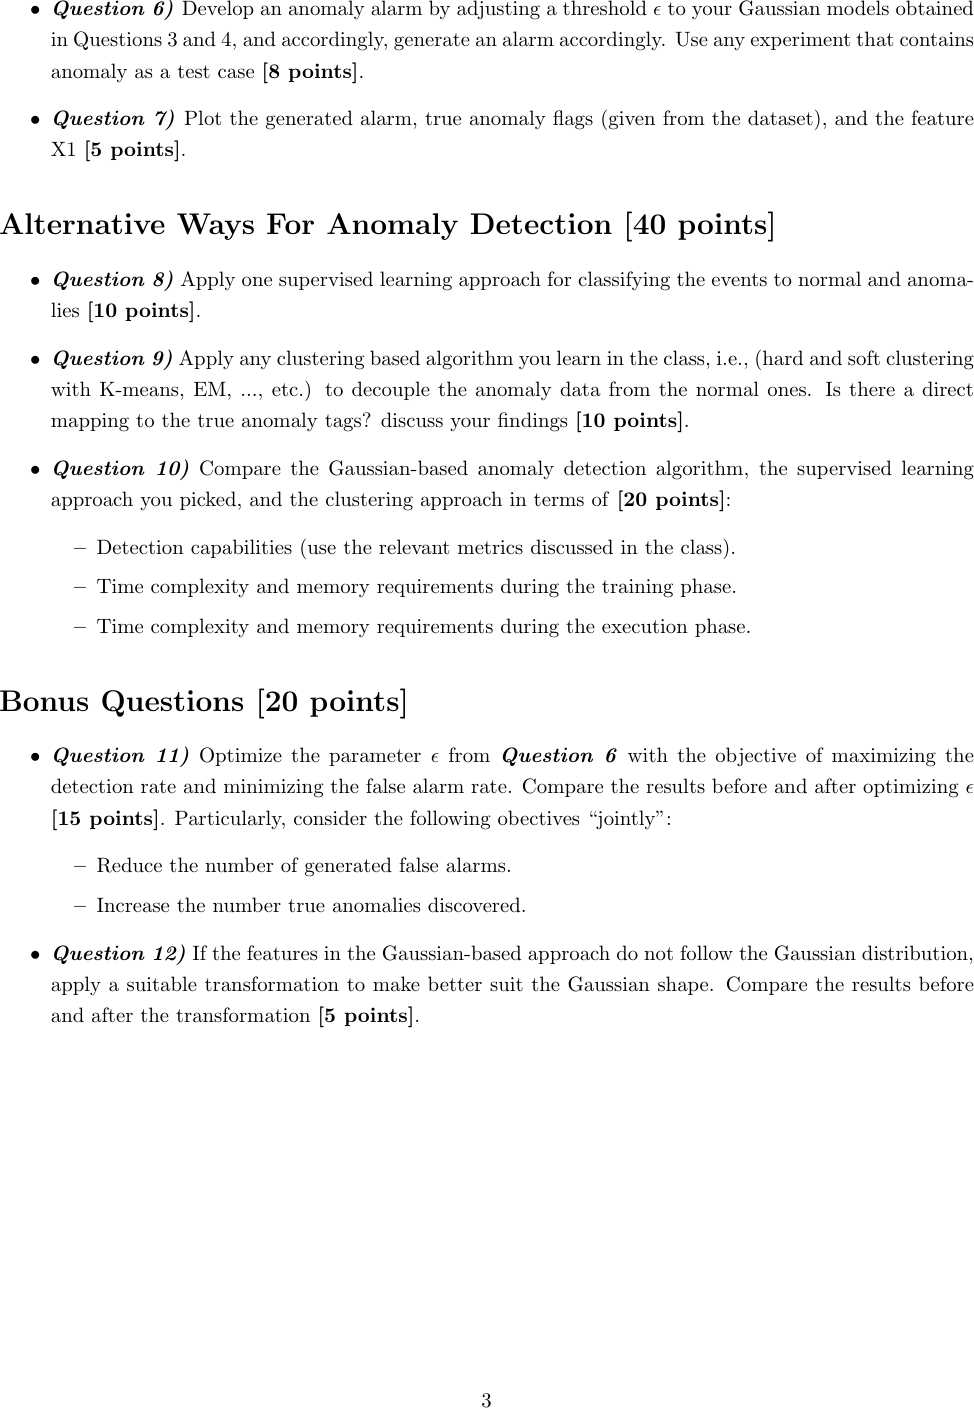 Page 3 of 3 - ECE9309 9039  Exam Instructions